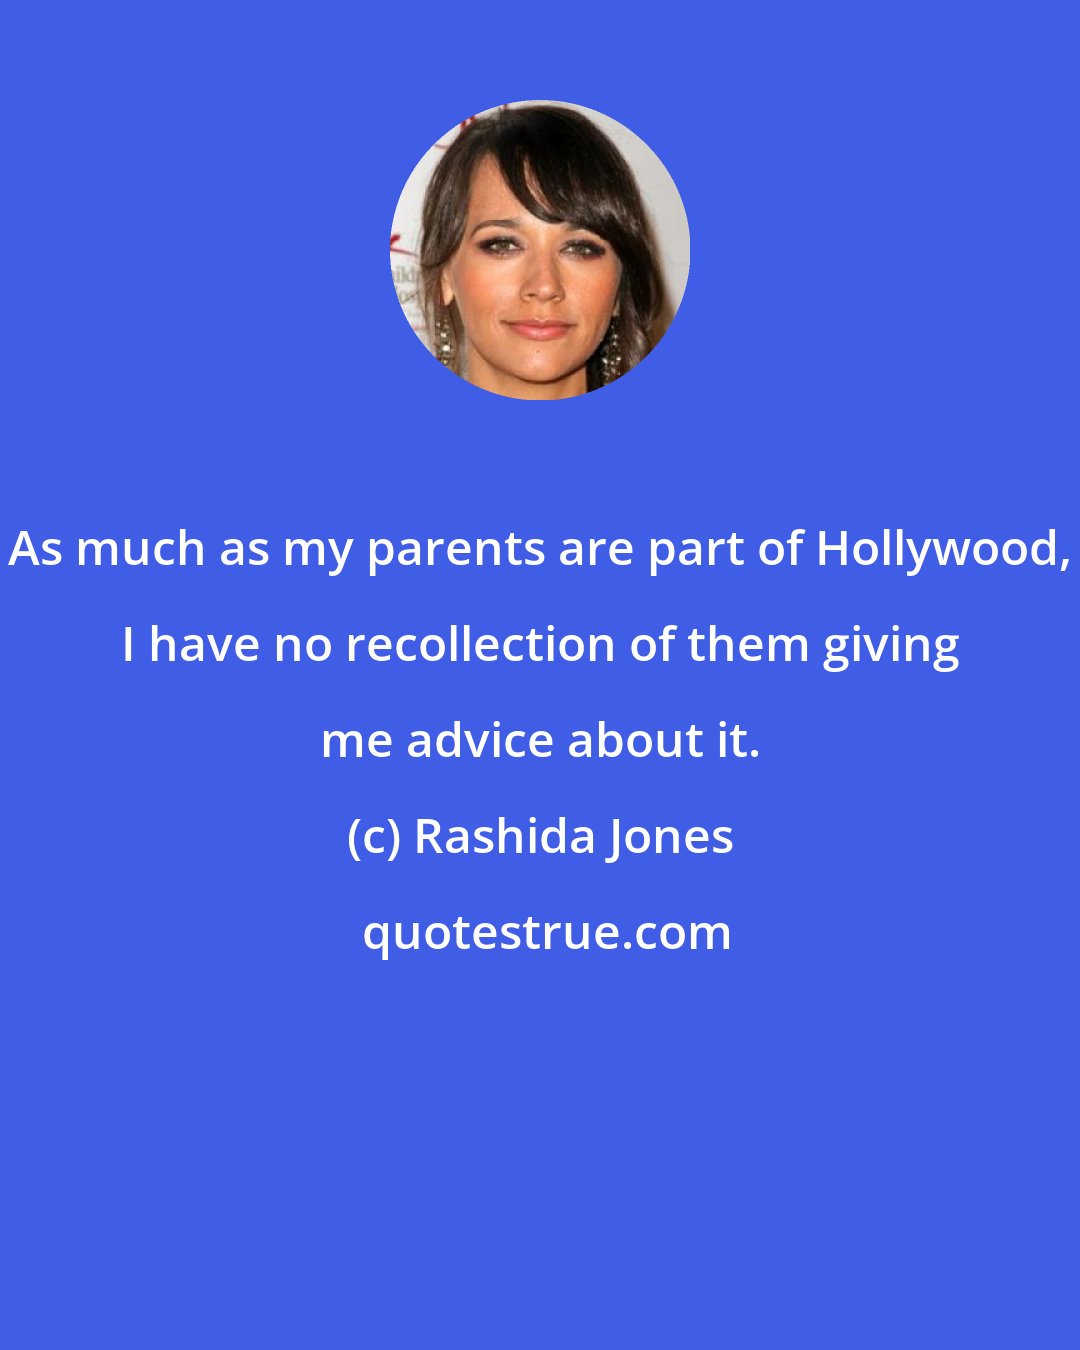 Rashida Jones: As much as my parents are part of Hollywood, I have no recollection of them giving me advice about it.